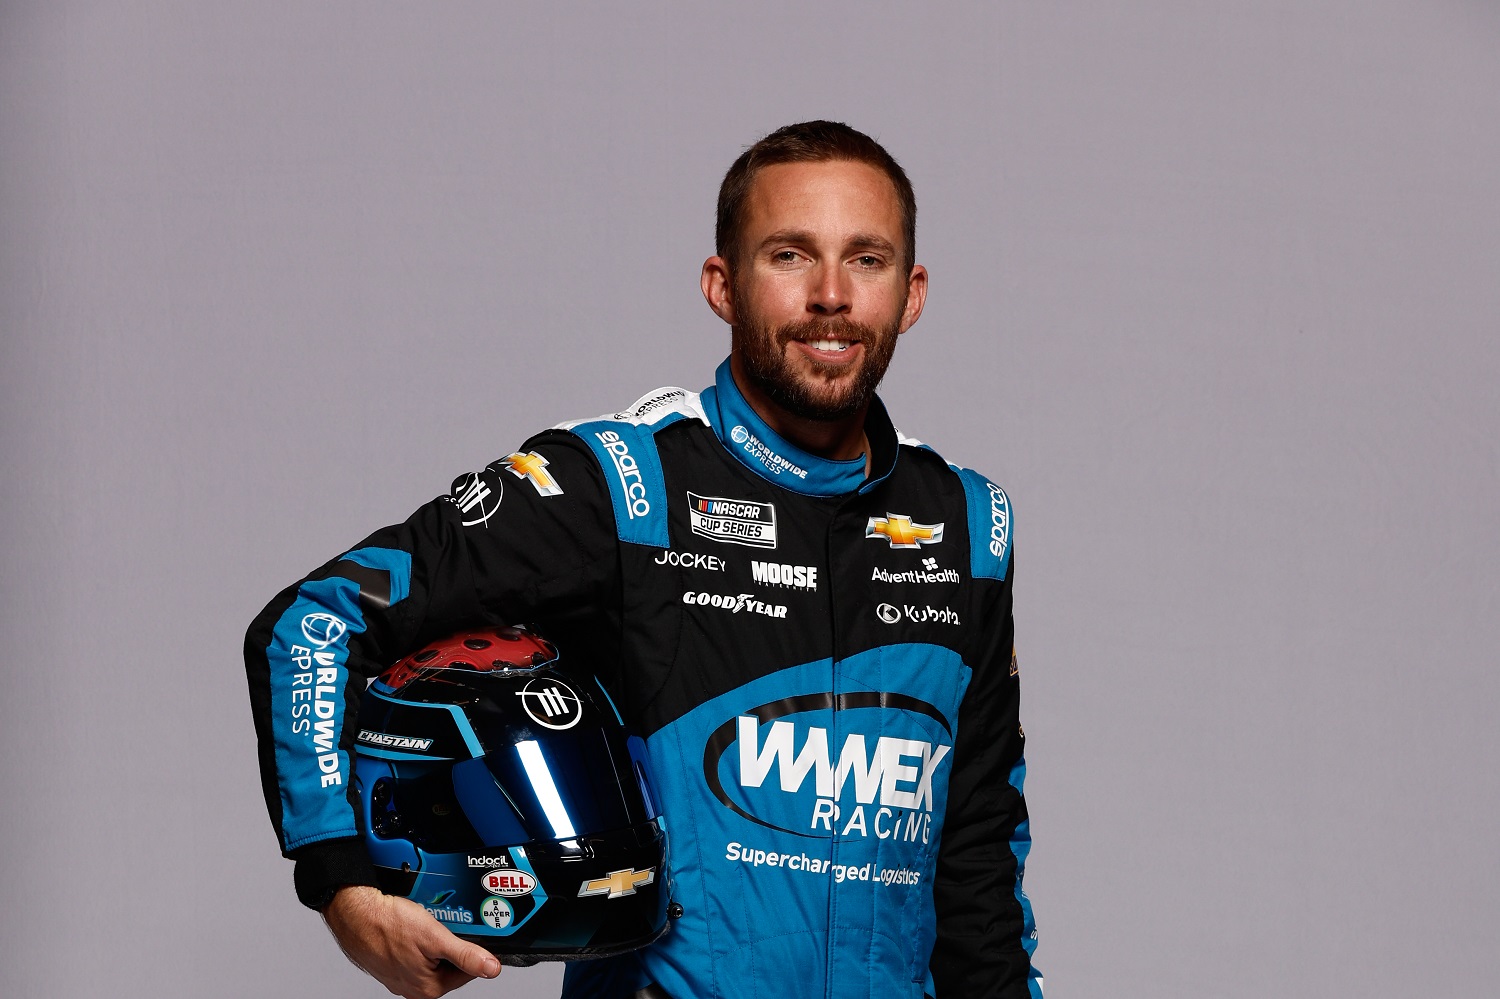 Ross Chastain poses for a photo during NASCAR Production Days at Charlotte Convention Center on Jan. 18, 2023.